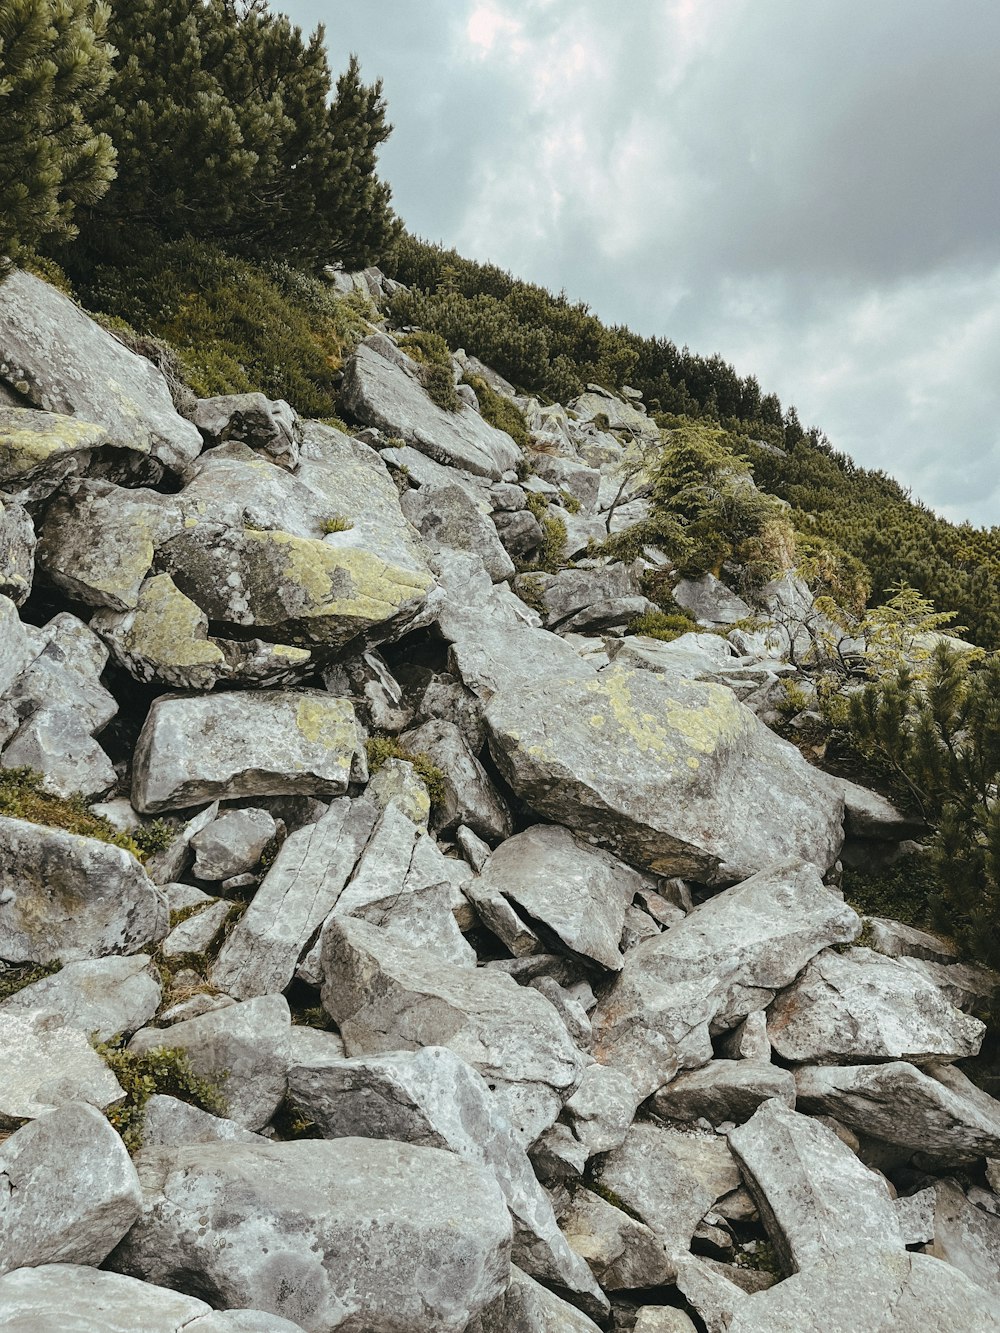 a large pile of rocks with trees in the background